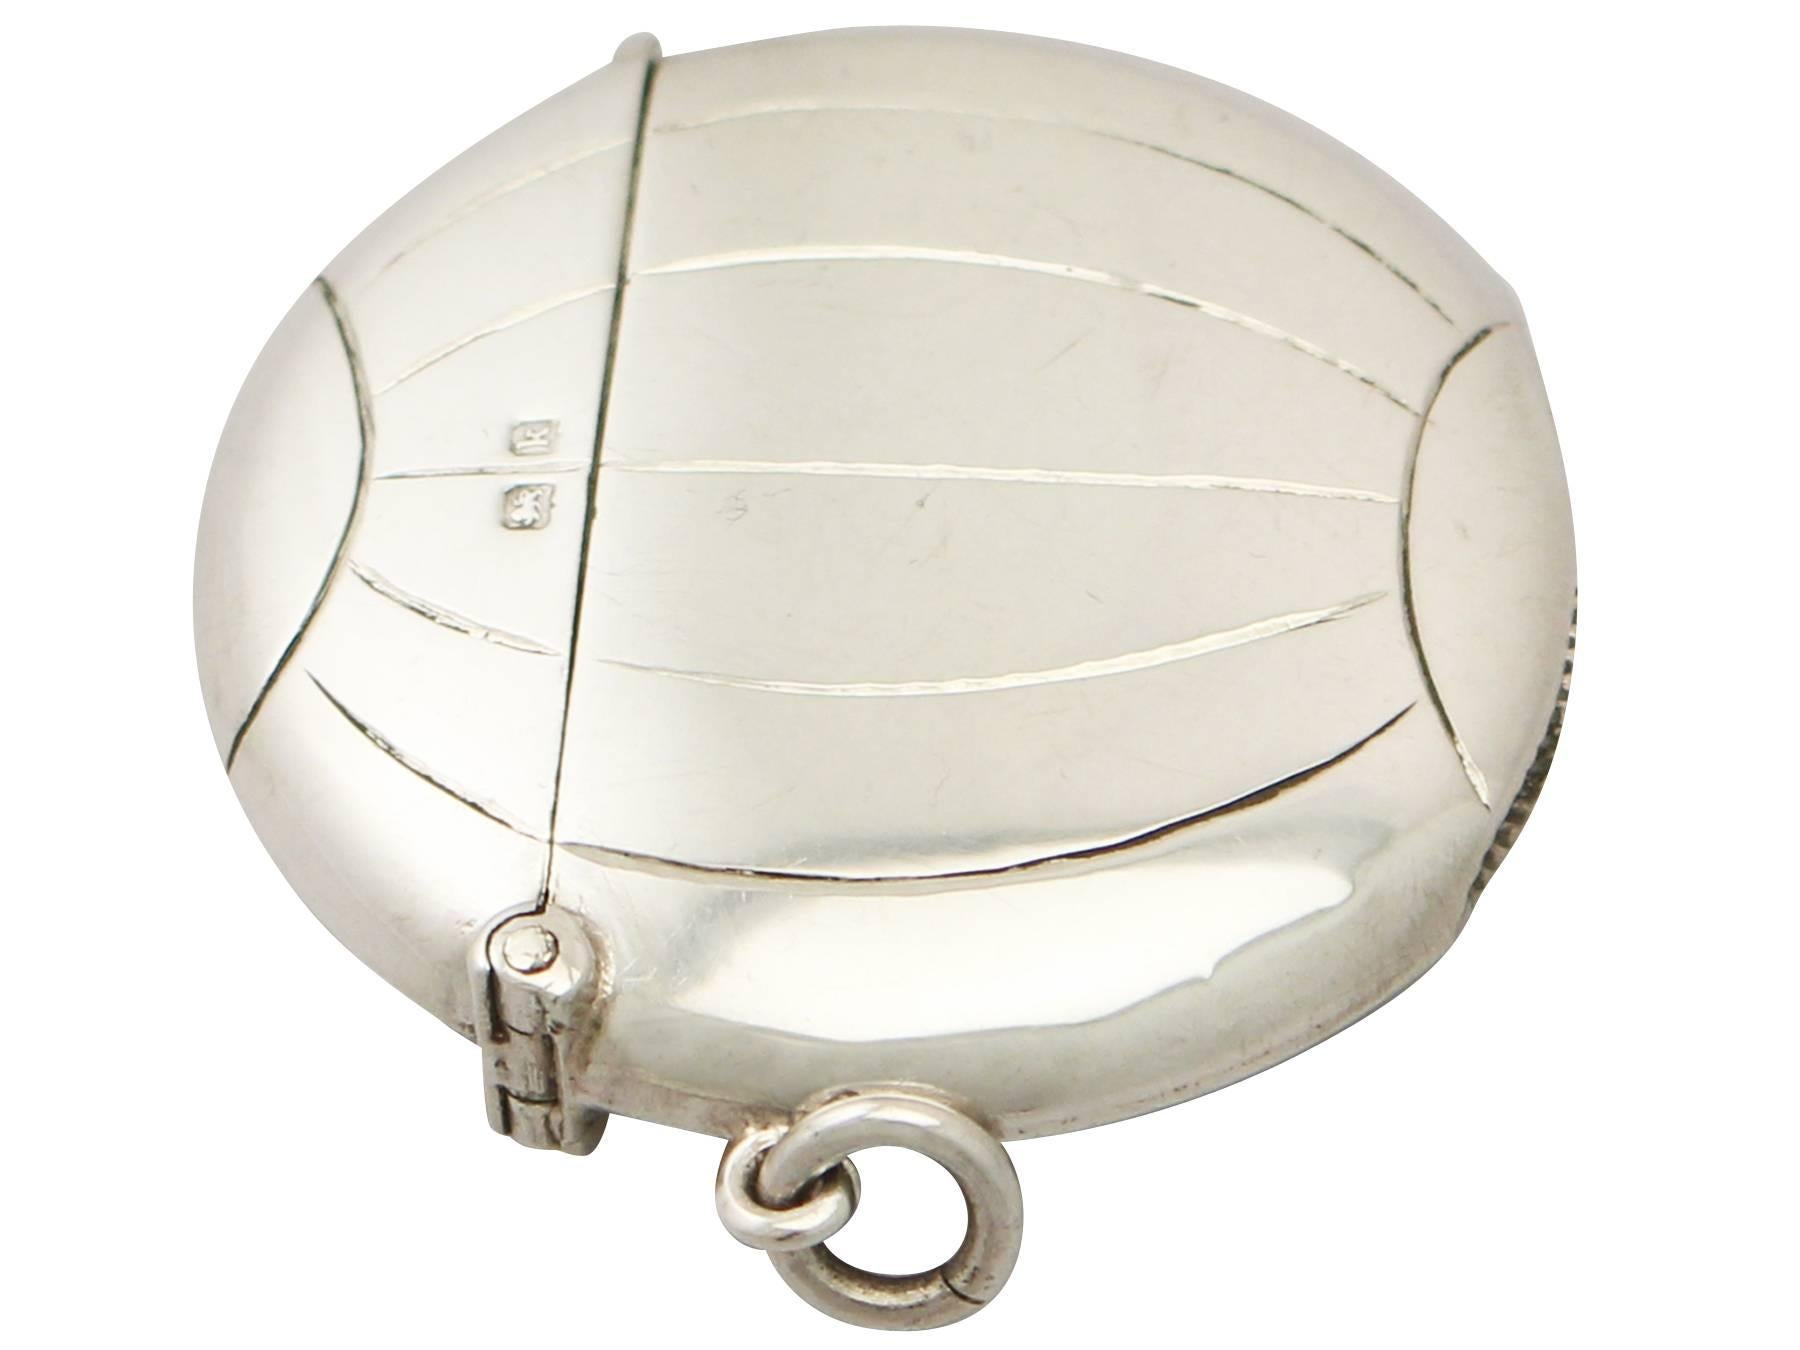 Early 20th Century Sterling Silver 'Football' Vesta Case - Antique Edwardian